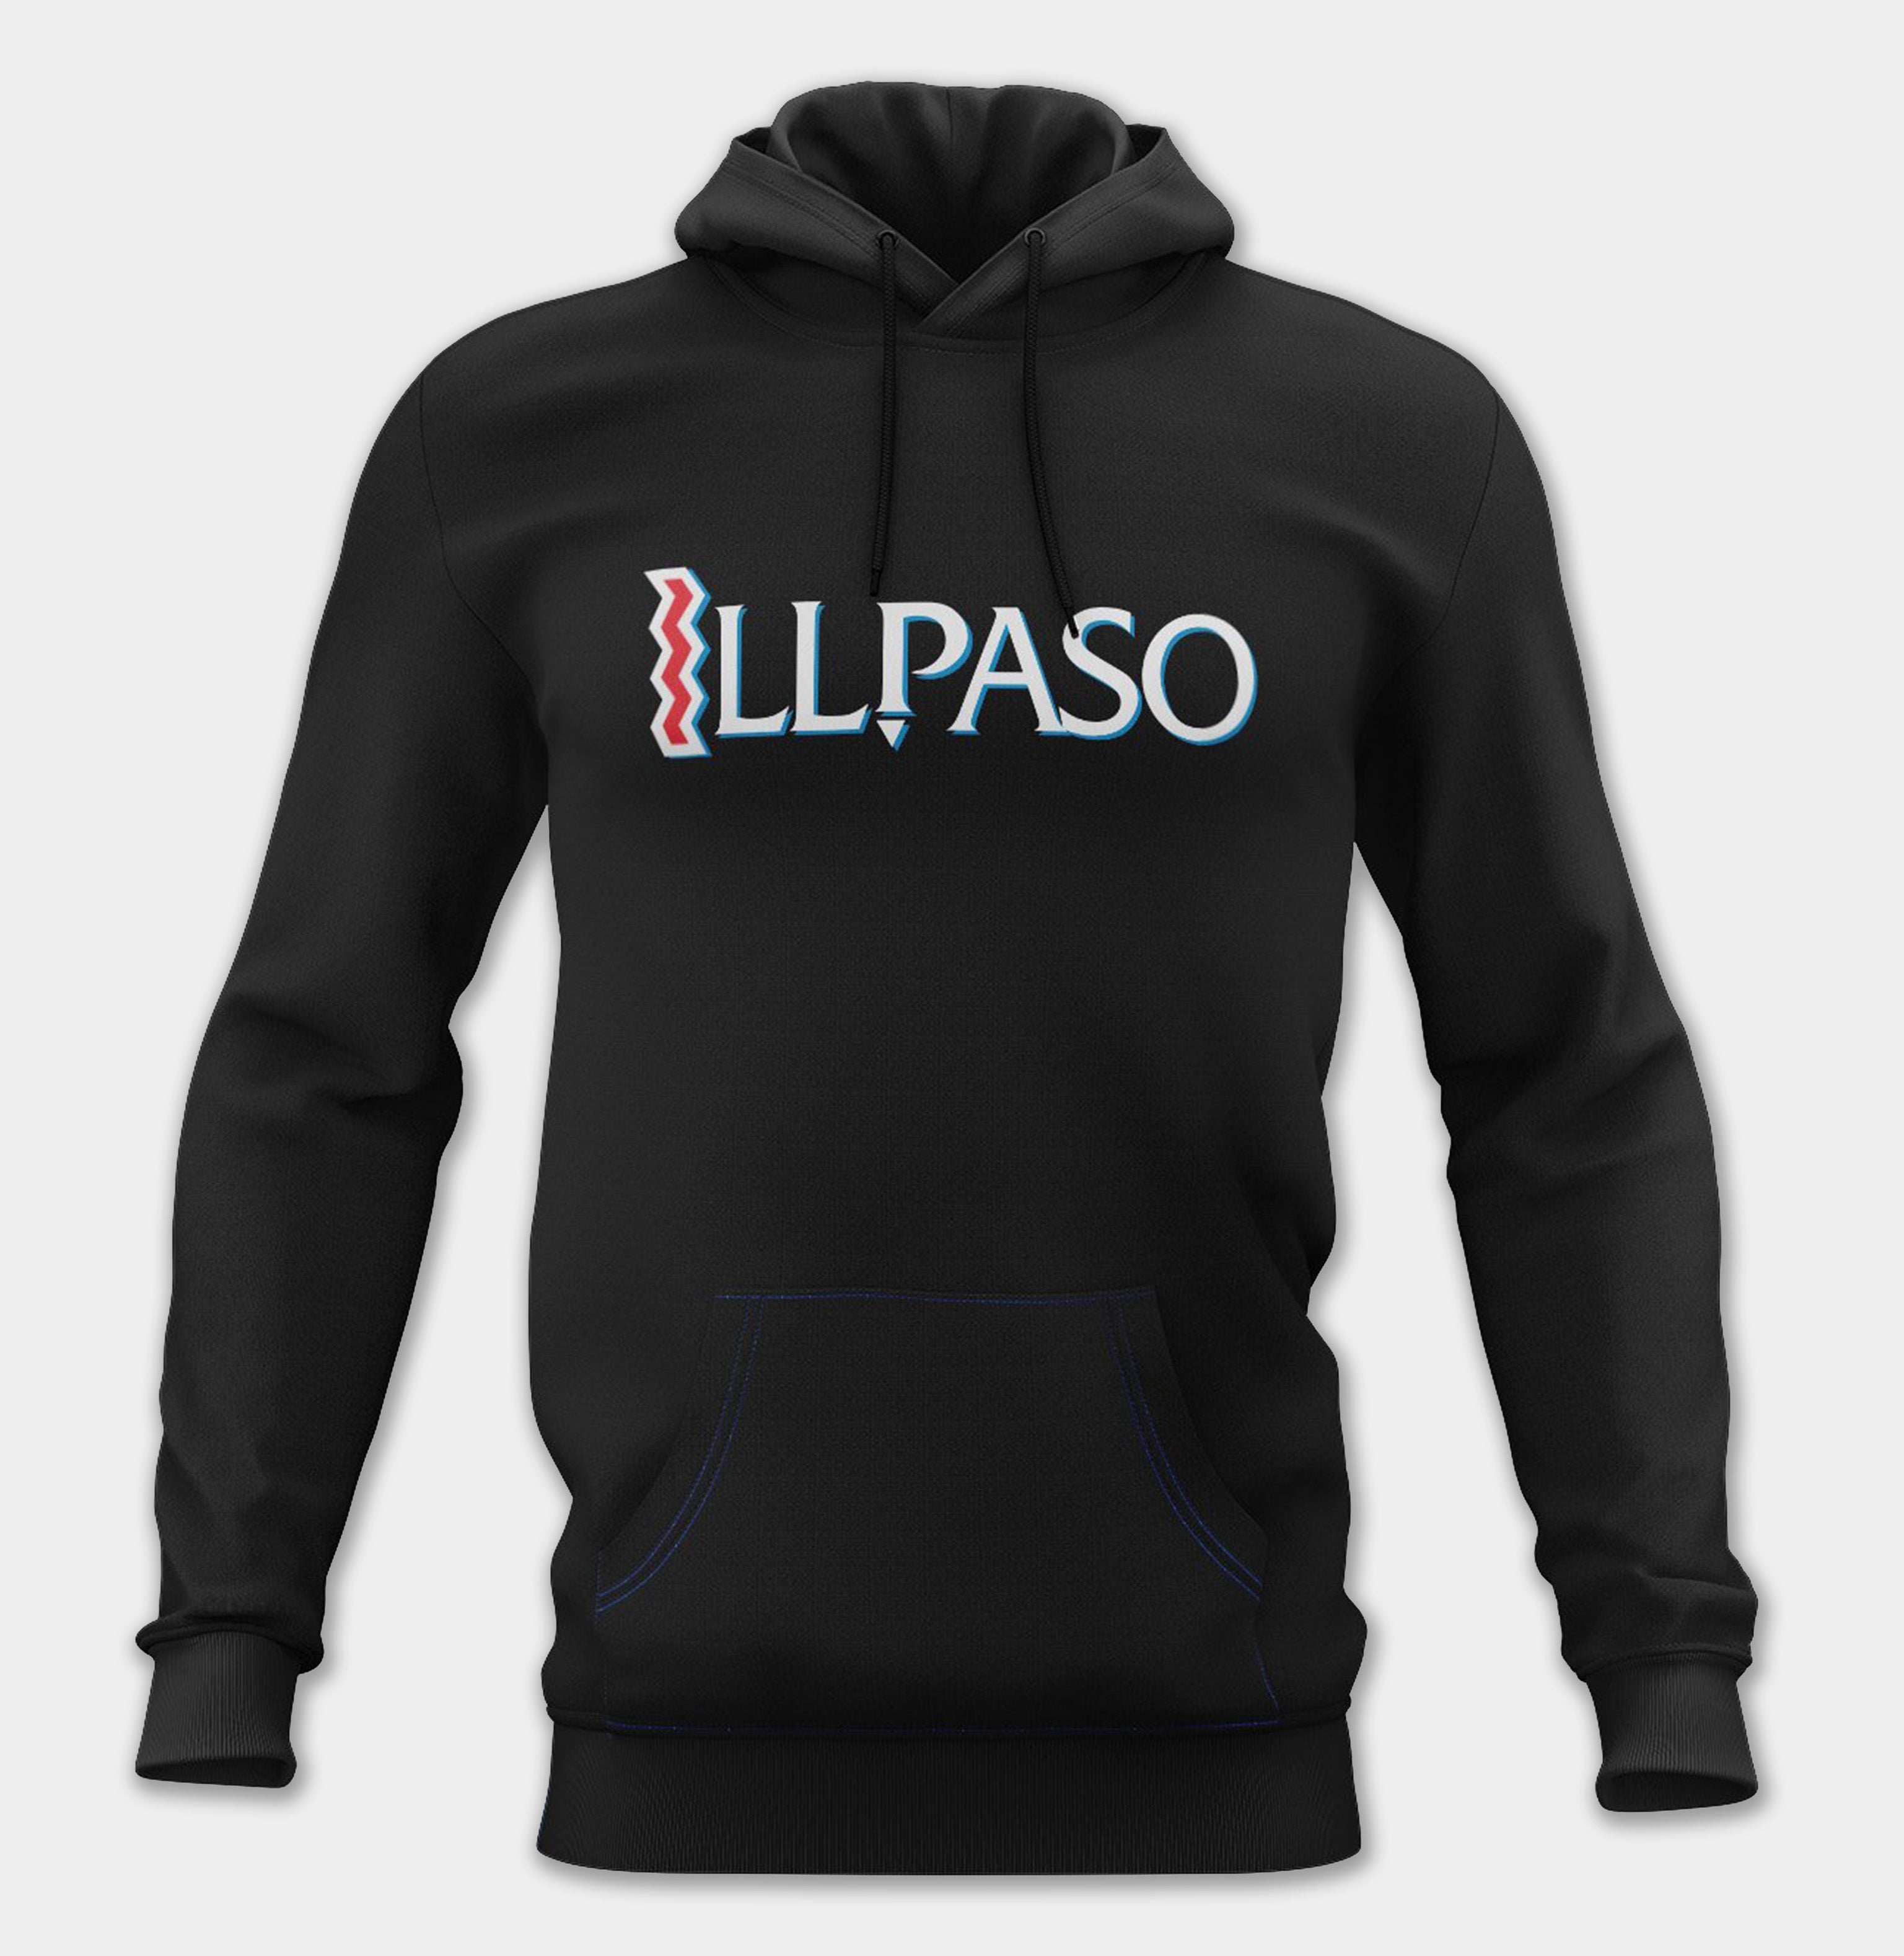 St. Ides Tribute Unisex Pullover Hoodie (Black) by illpaso